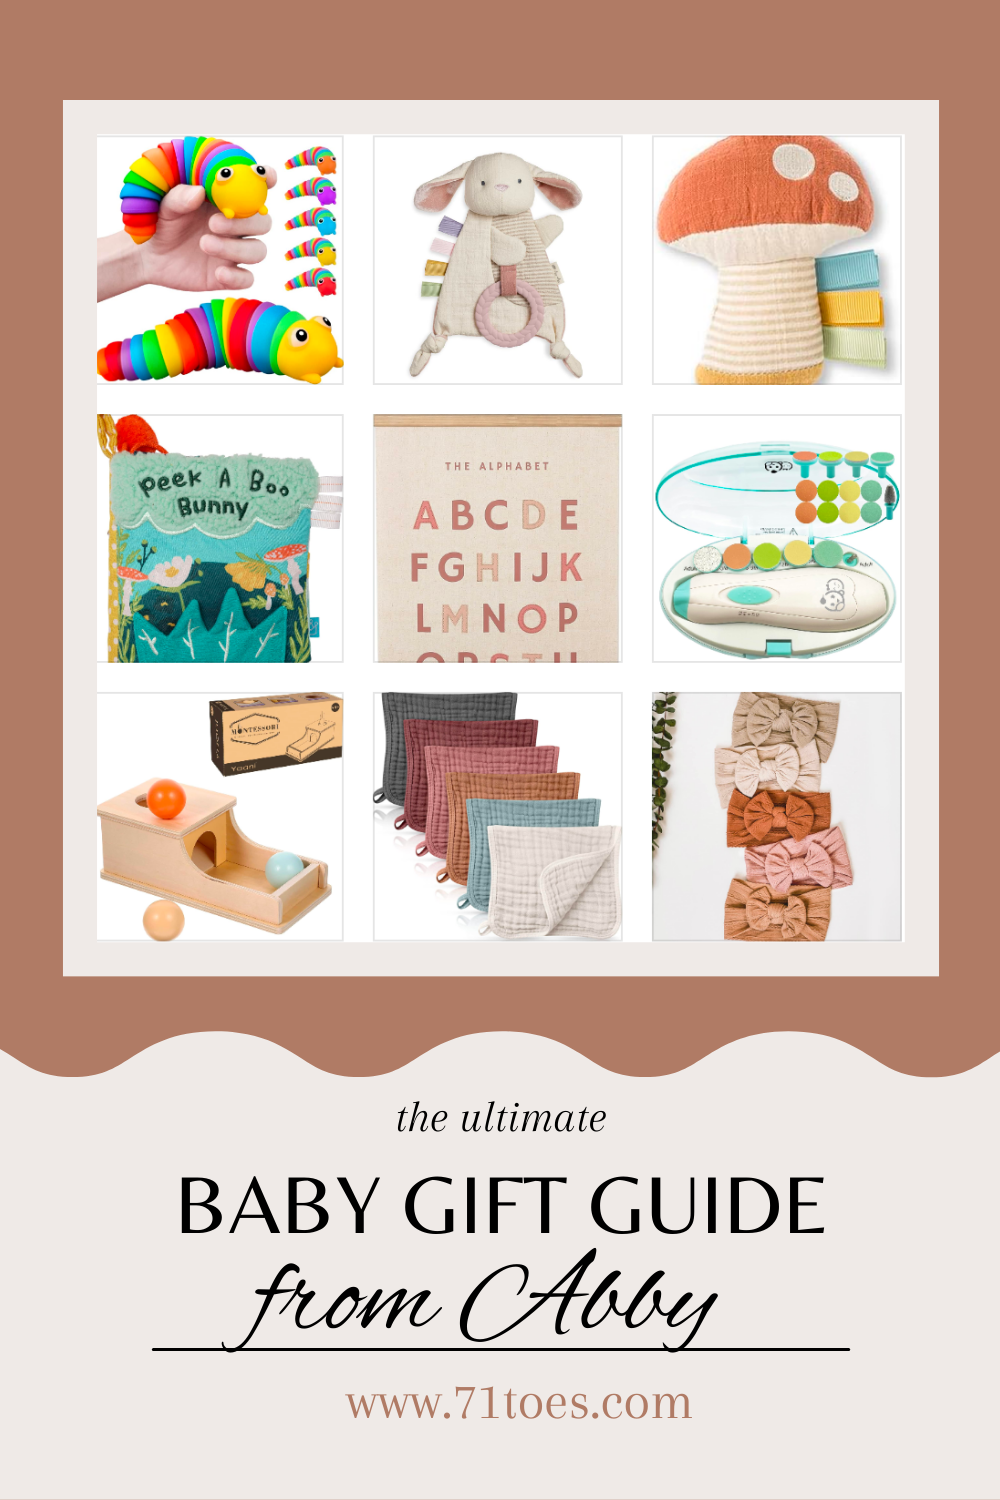 Lots of new baby gift ideas from Abby